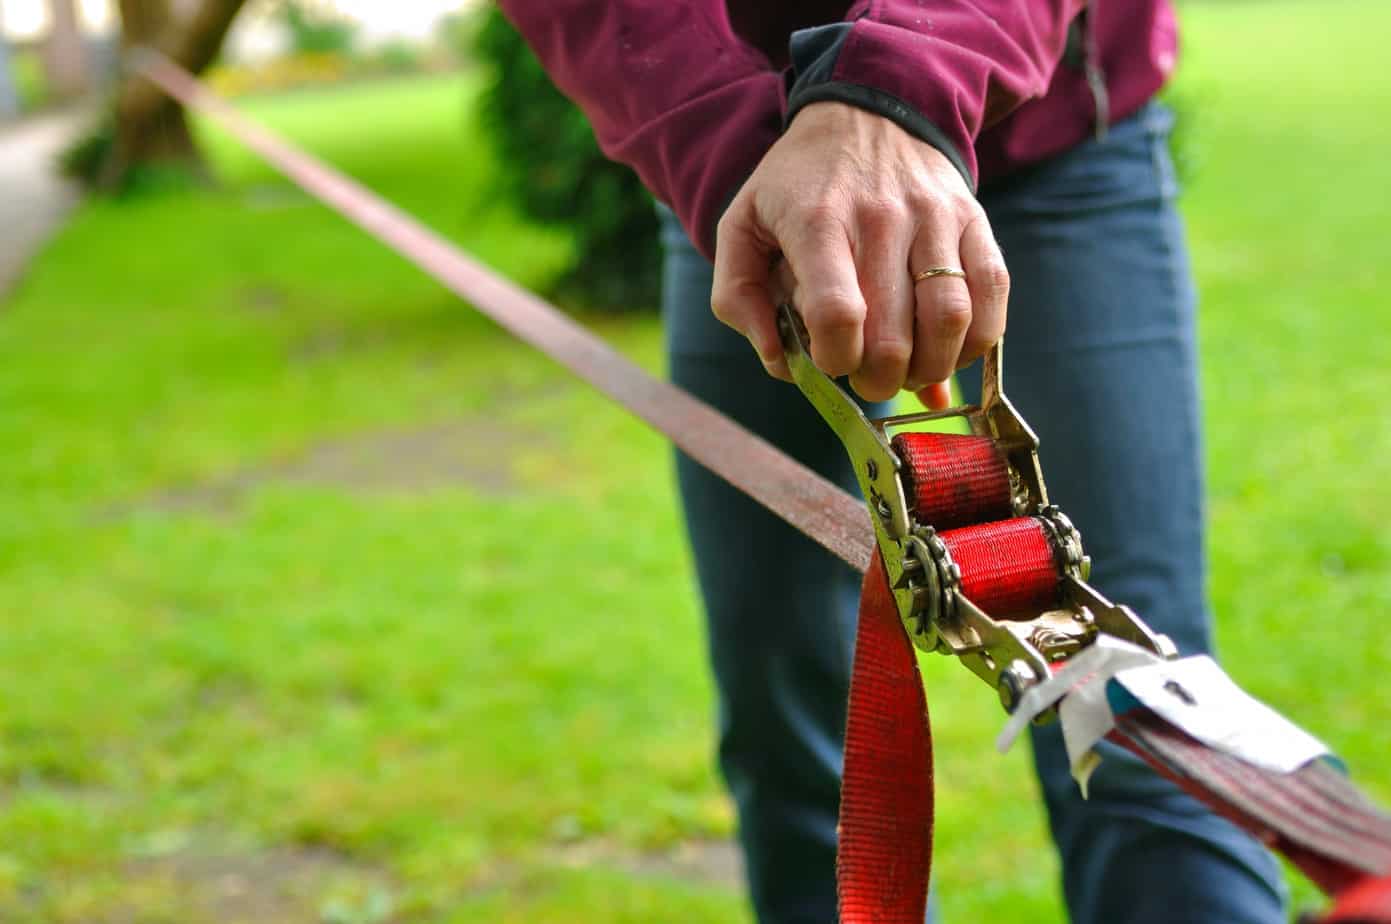 What Is The Maximum Slackline Length For A Ratchet System?